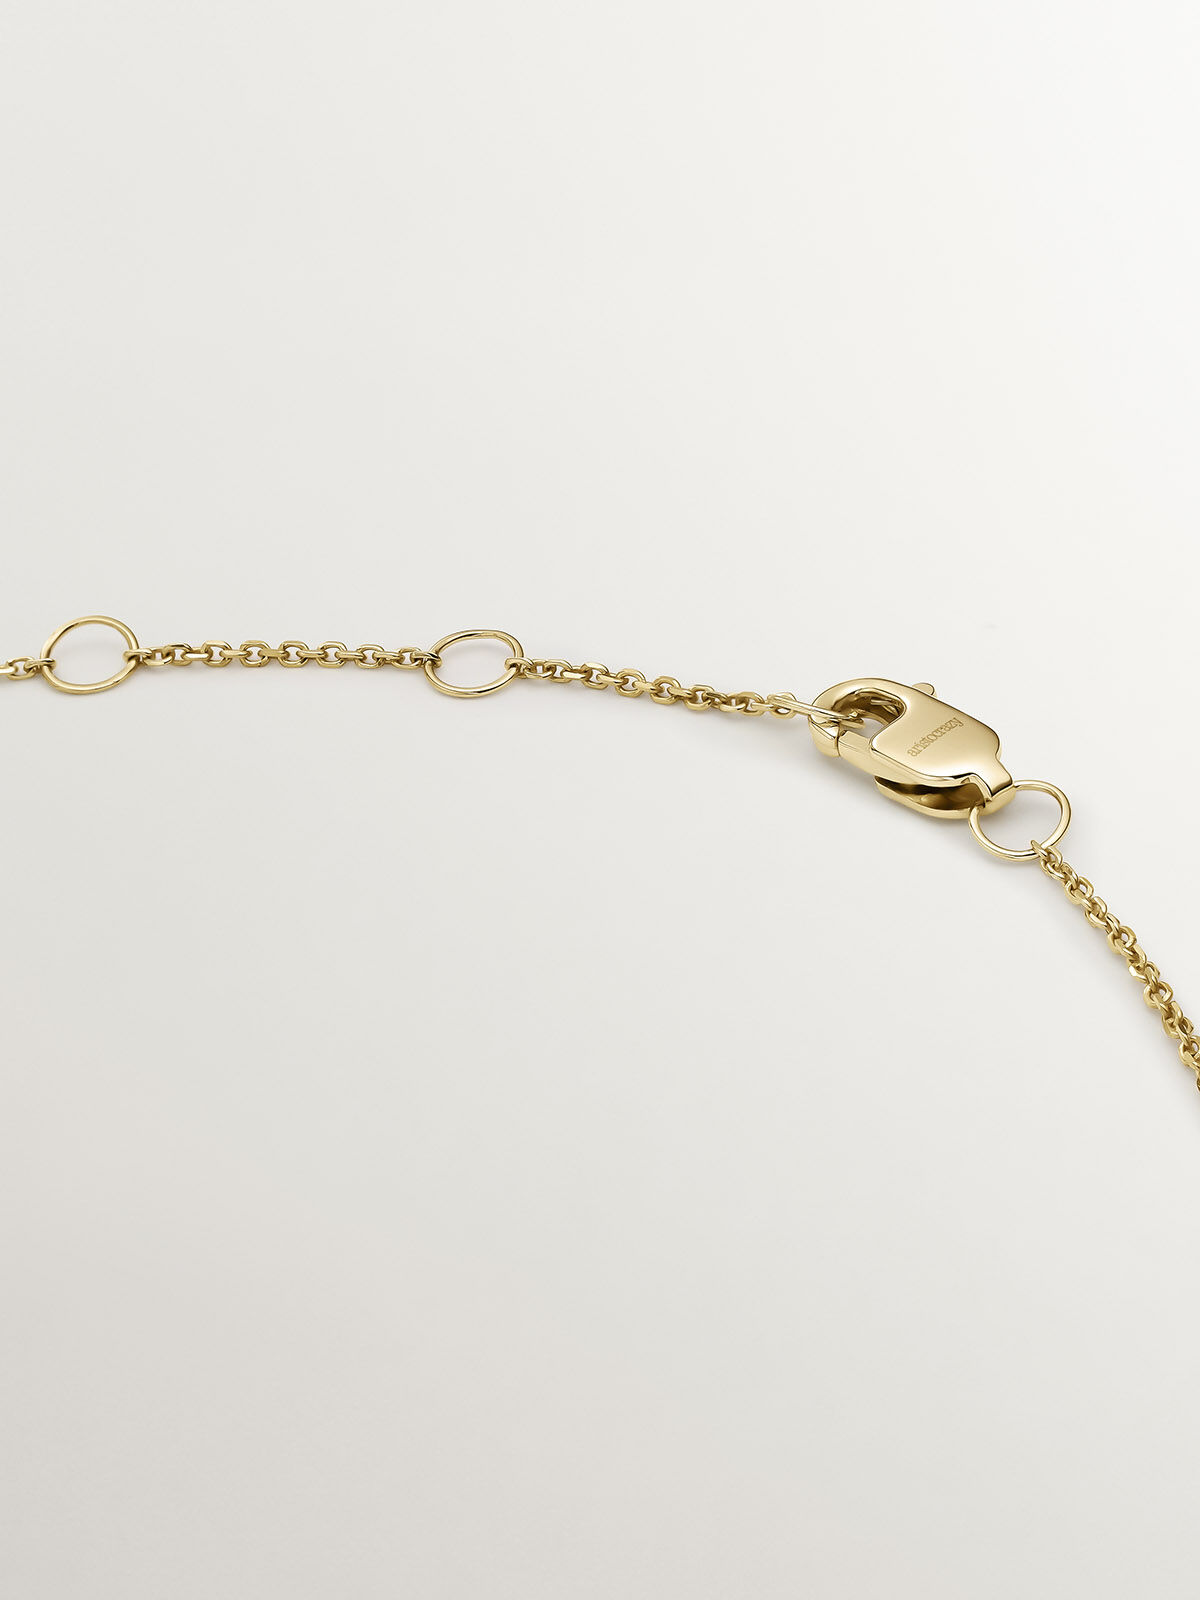 9K Yellow Gold Chain with Cross | Aristocrazy